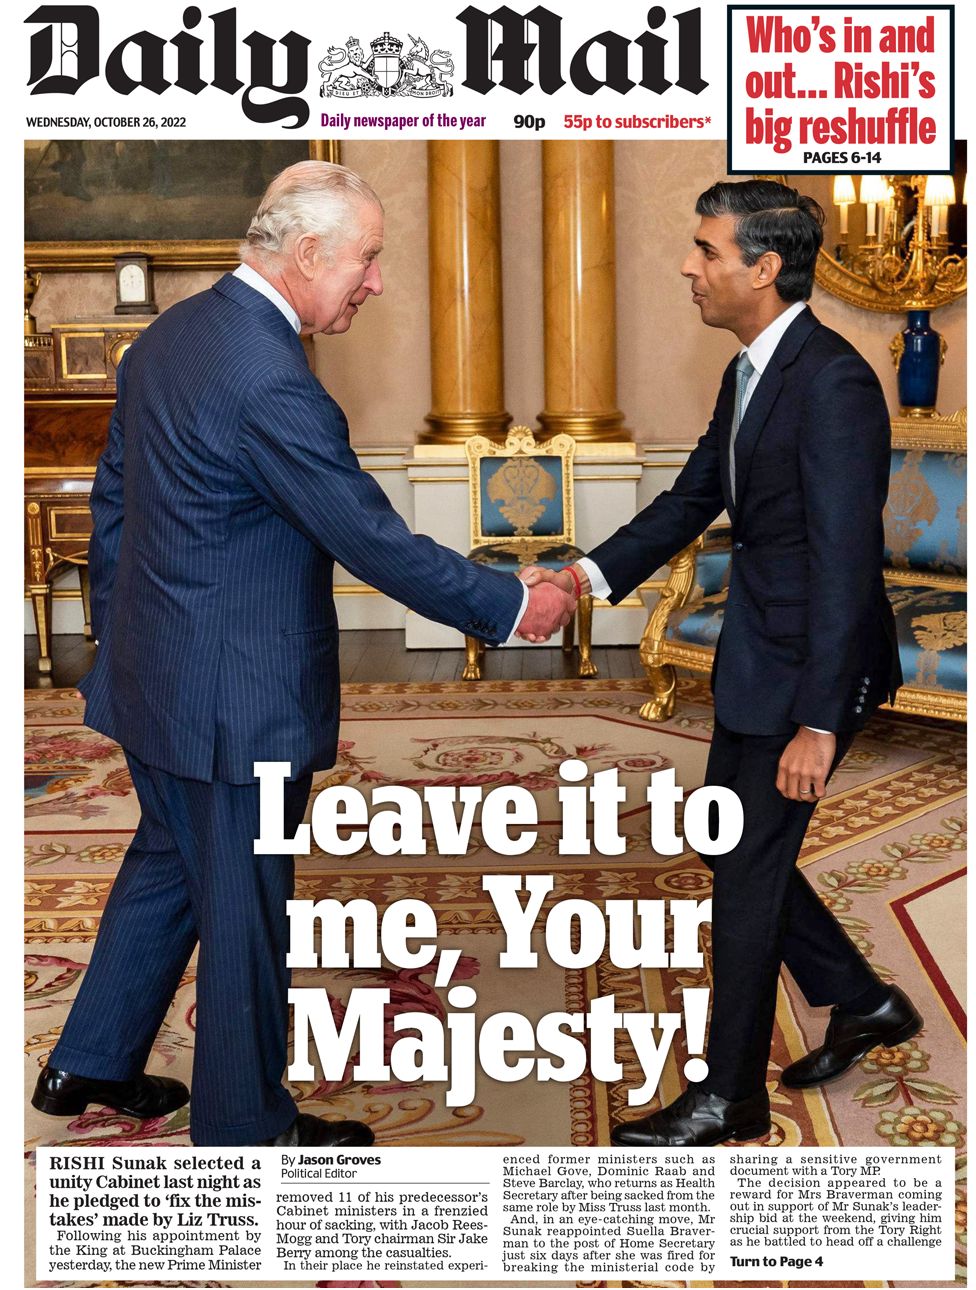 The Daily Mail front page has a large image of the prime minister meeting King Charles at his appointment into his new role.